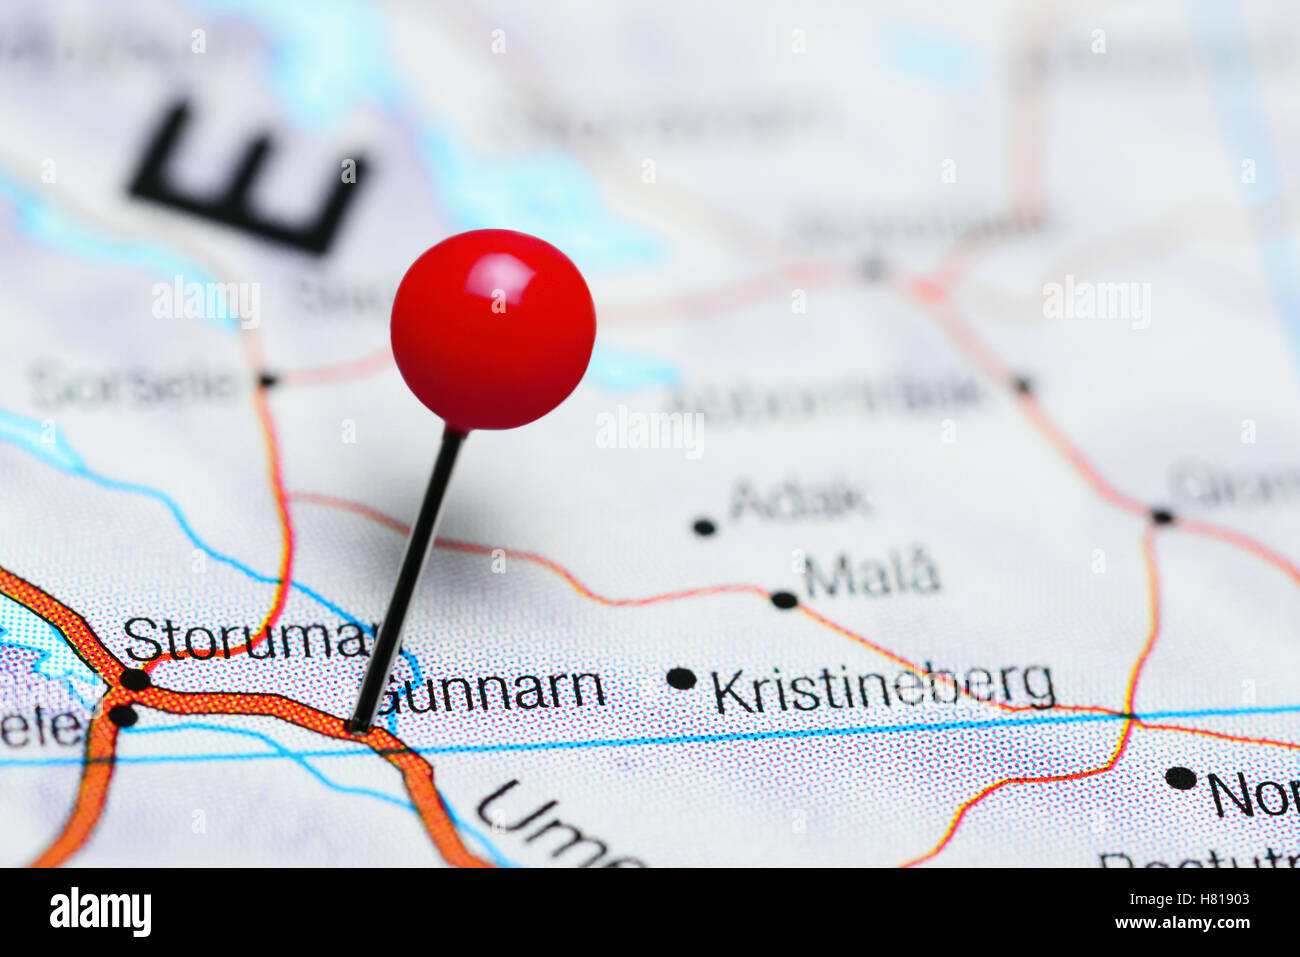 Gunnarn pinned on a map of Sweden Stock Photo